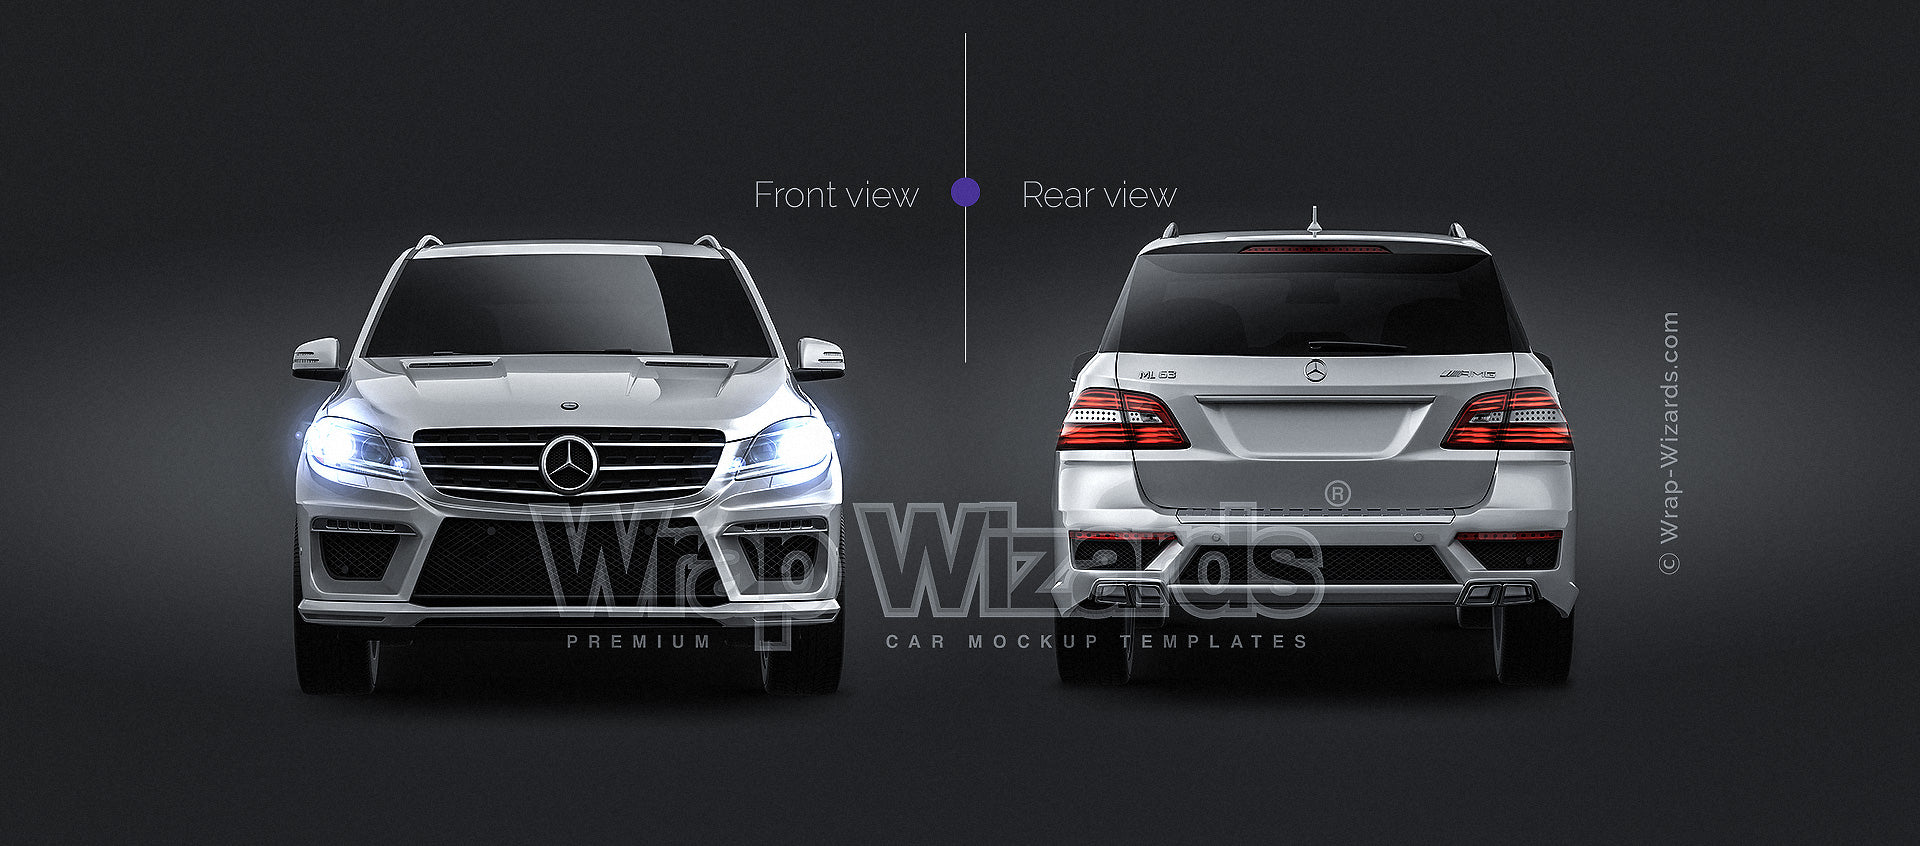 Mercedes-Benz ML W166 AMG 2012 glossy finish - all sides Car Mockup Template.psd